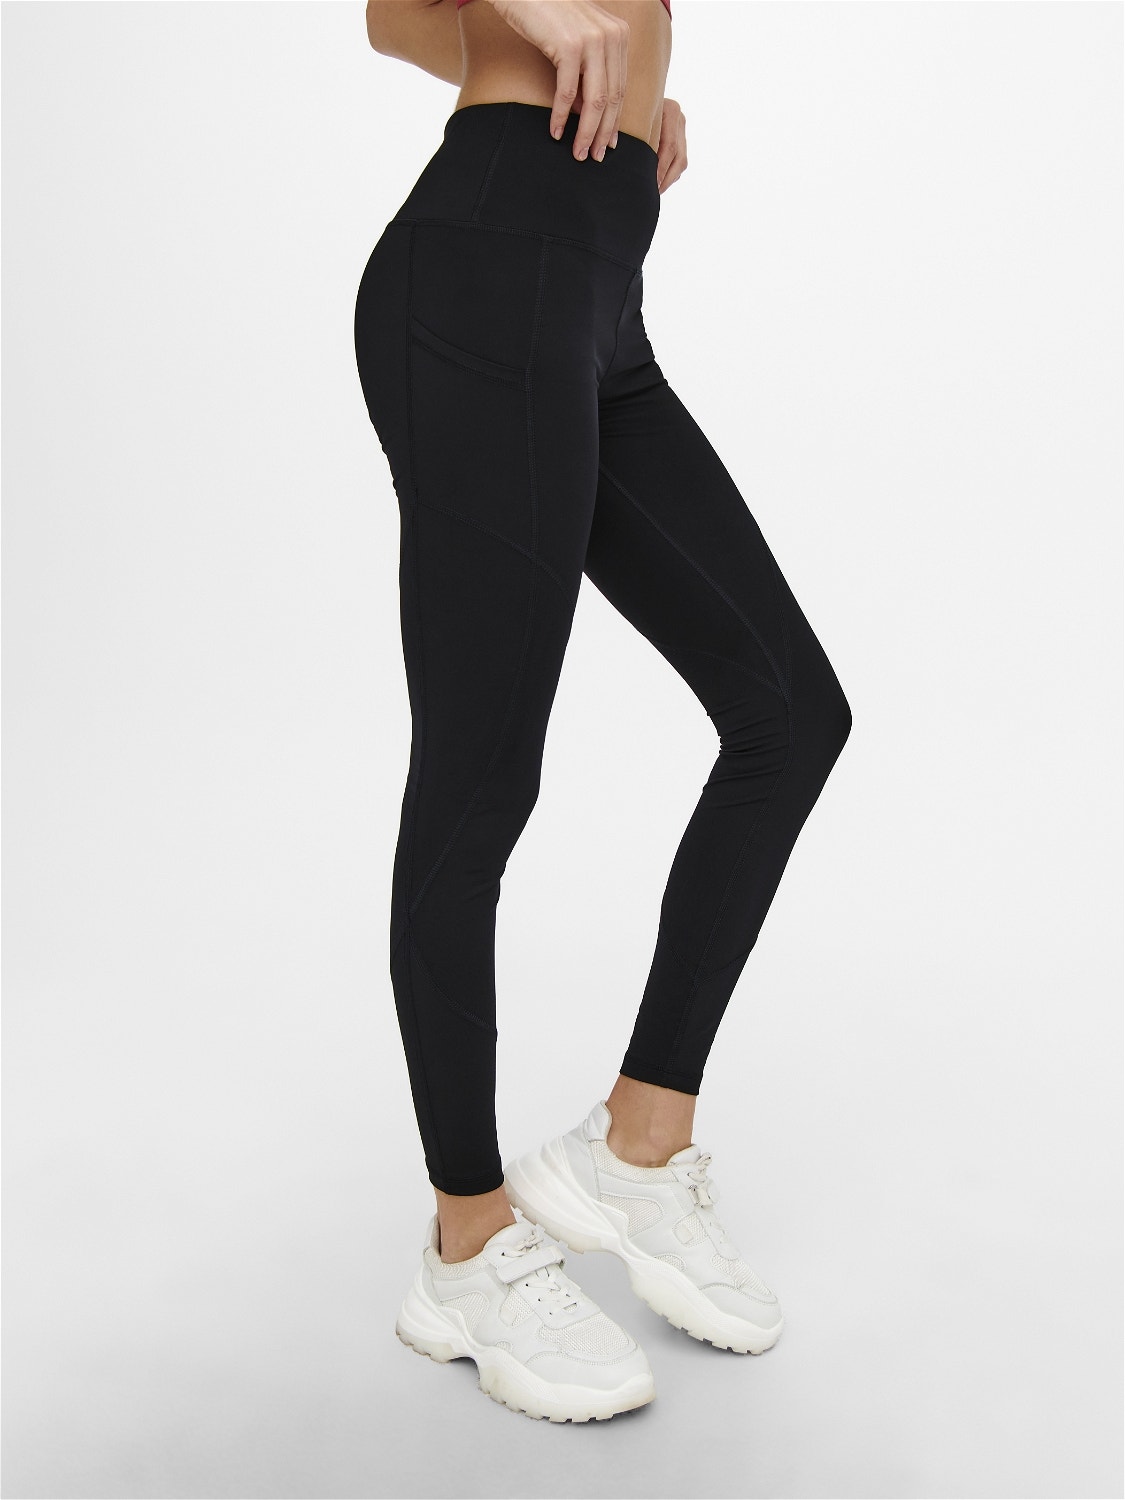 Grey lululemon leggings with pockets. Only